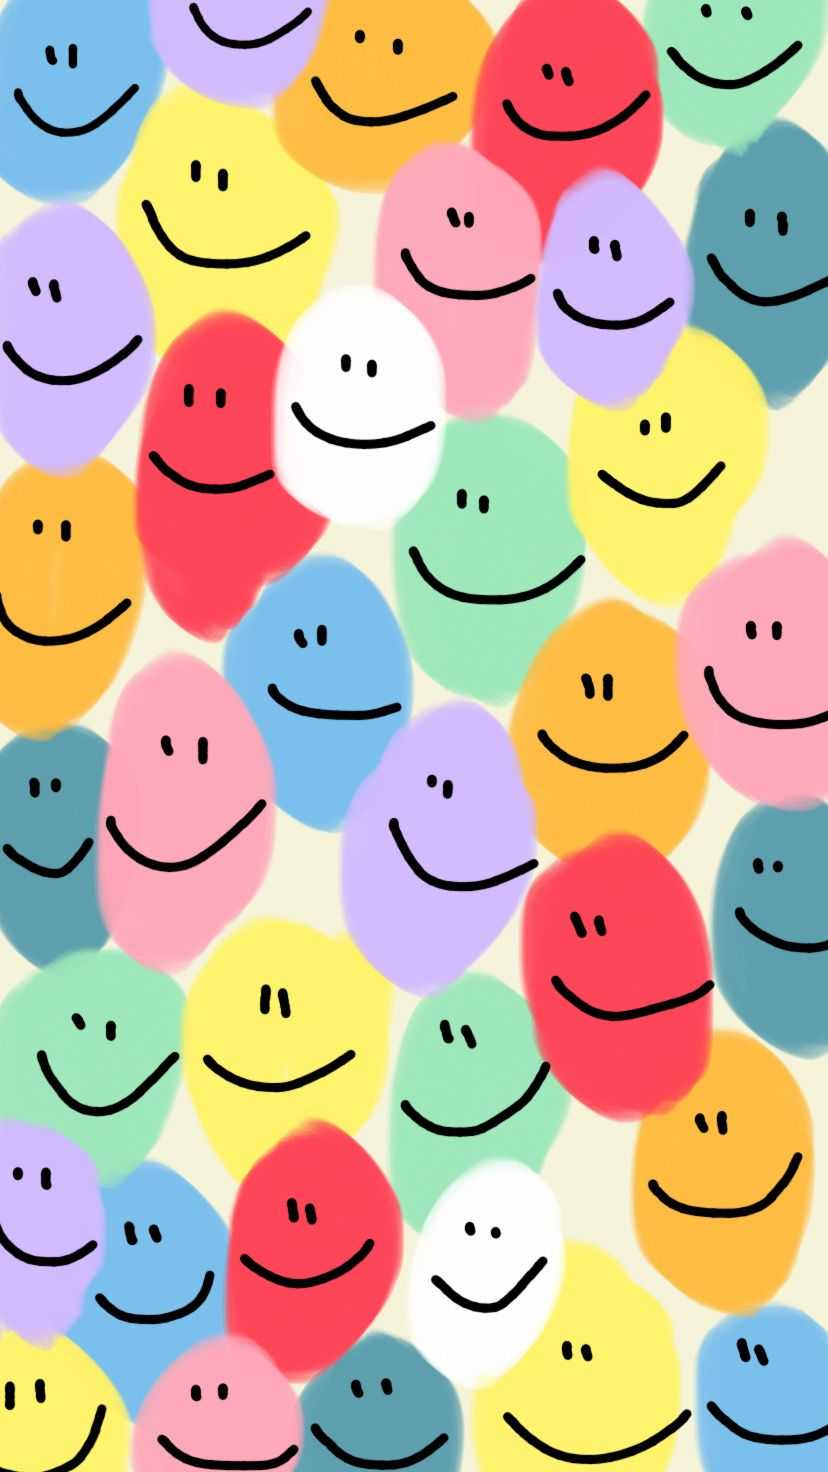 500 Smiley Face Pictures  Download Free Images on Unsplash